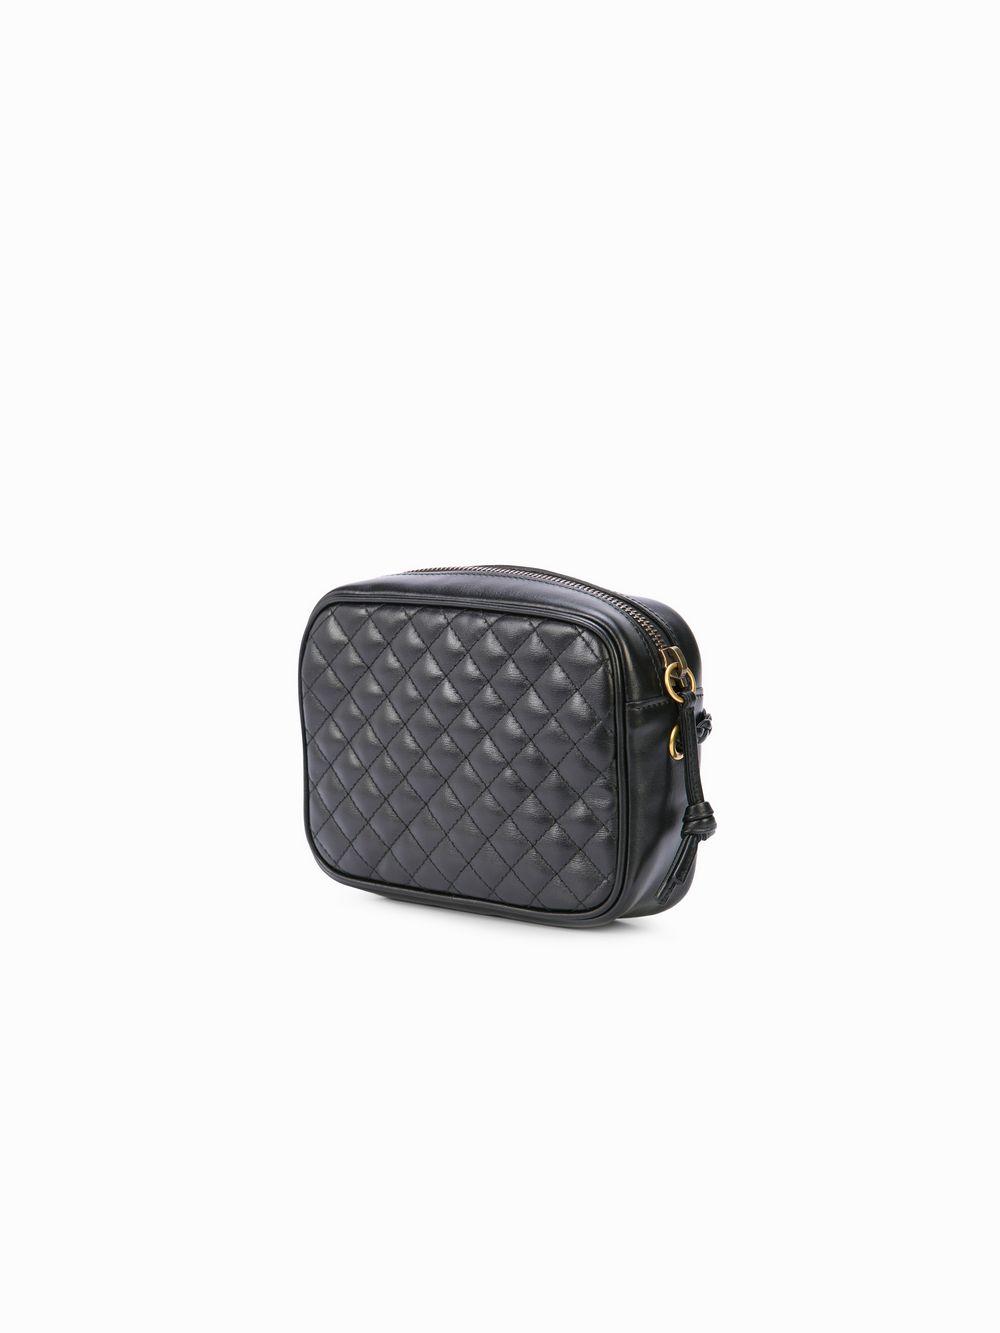 Gucci Black Quilted-leather Small Shoulder Bag in Black - Lyst